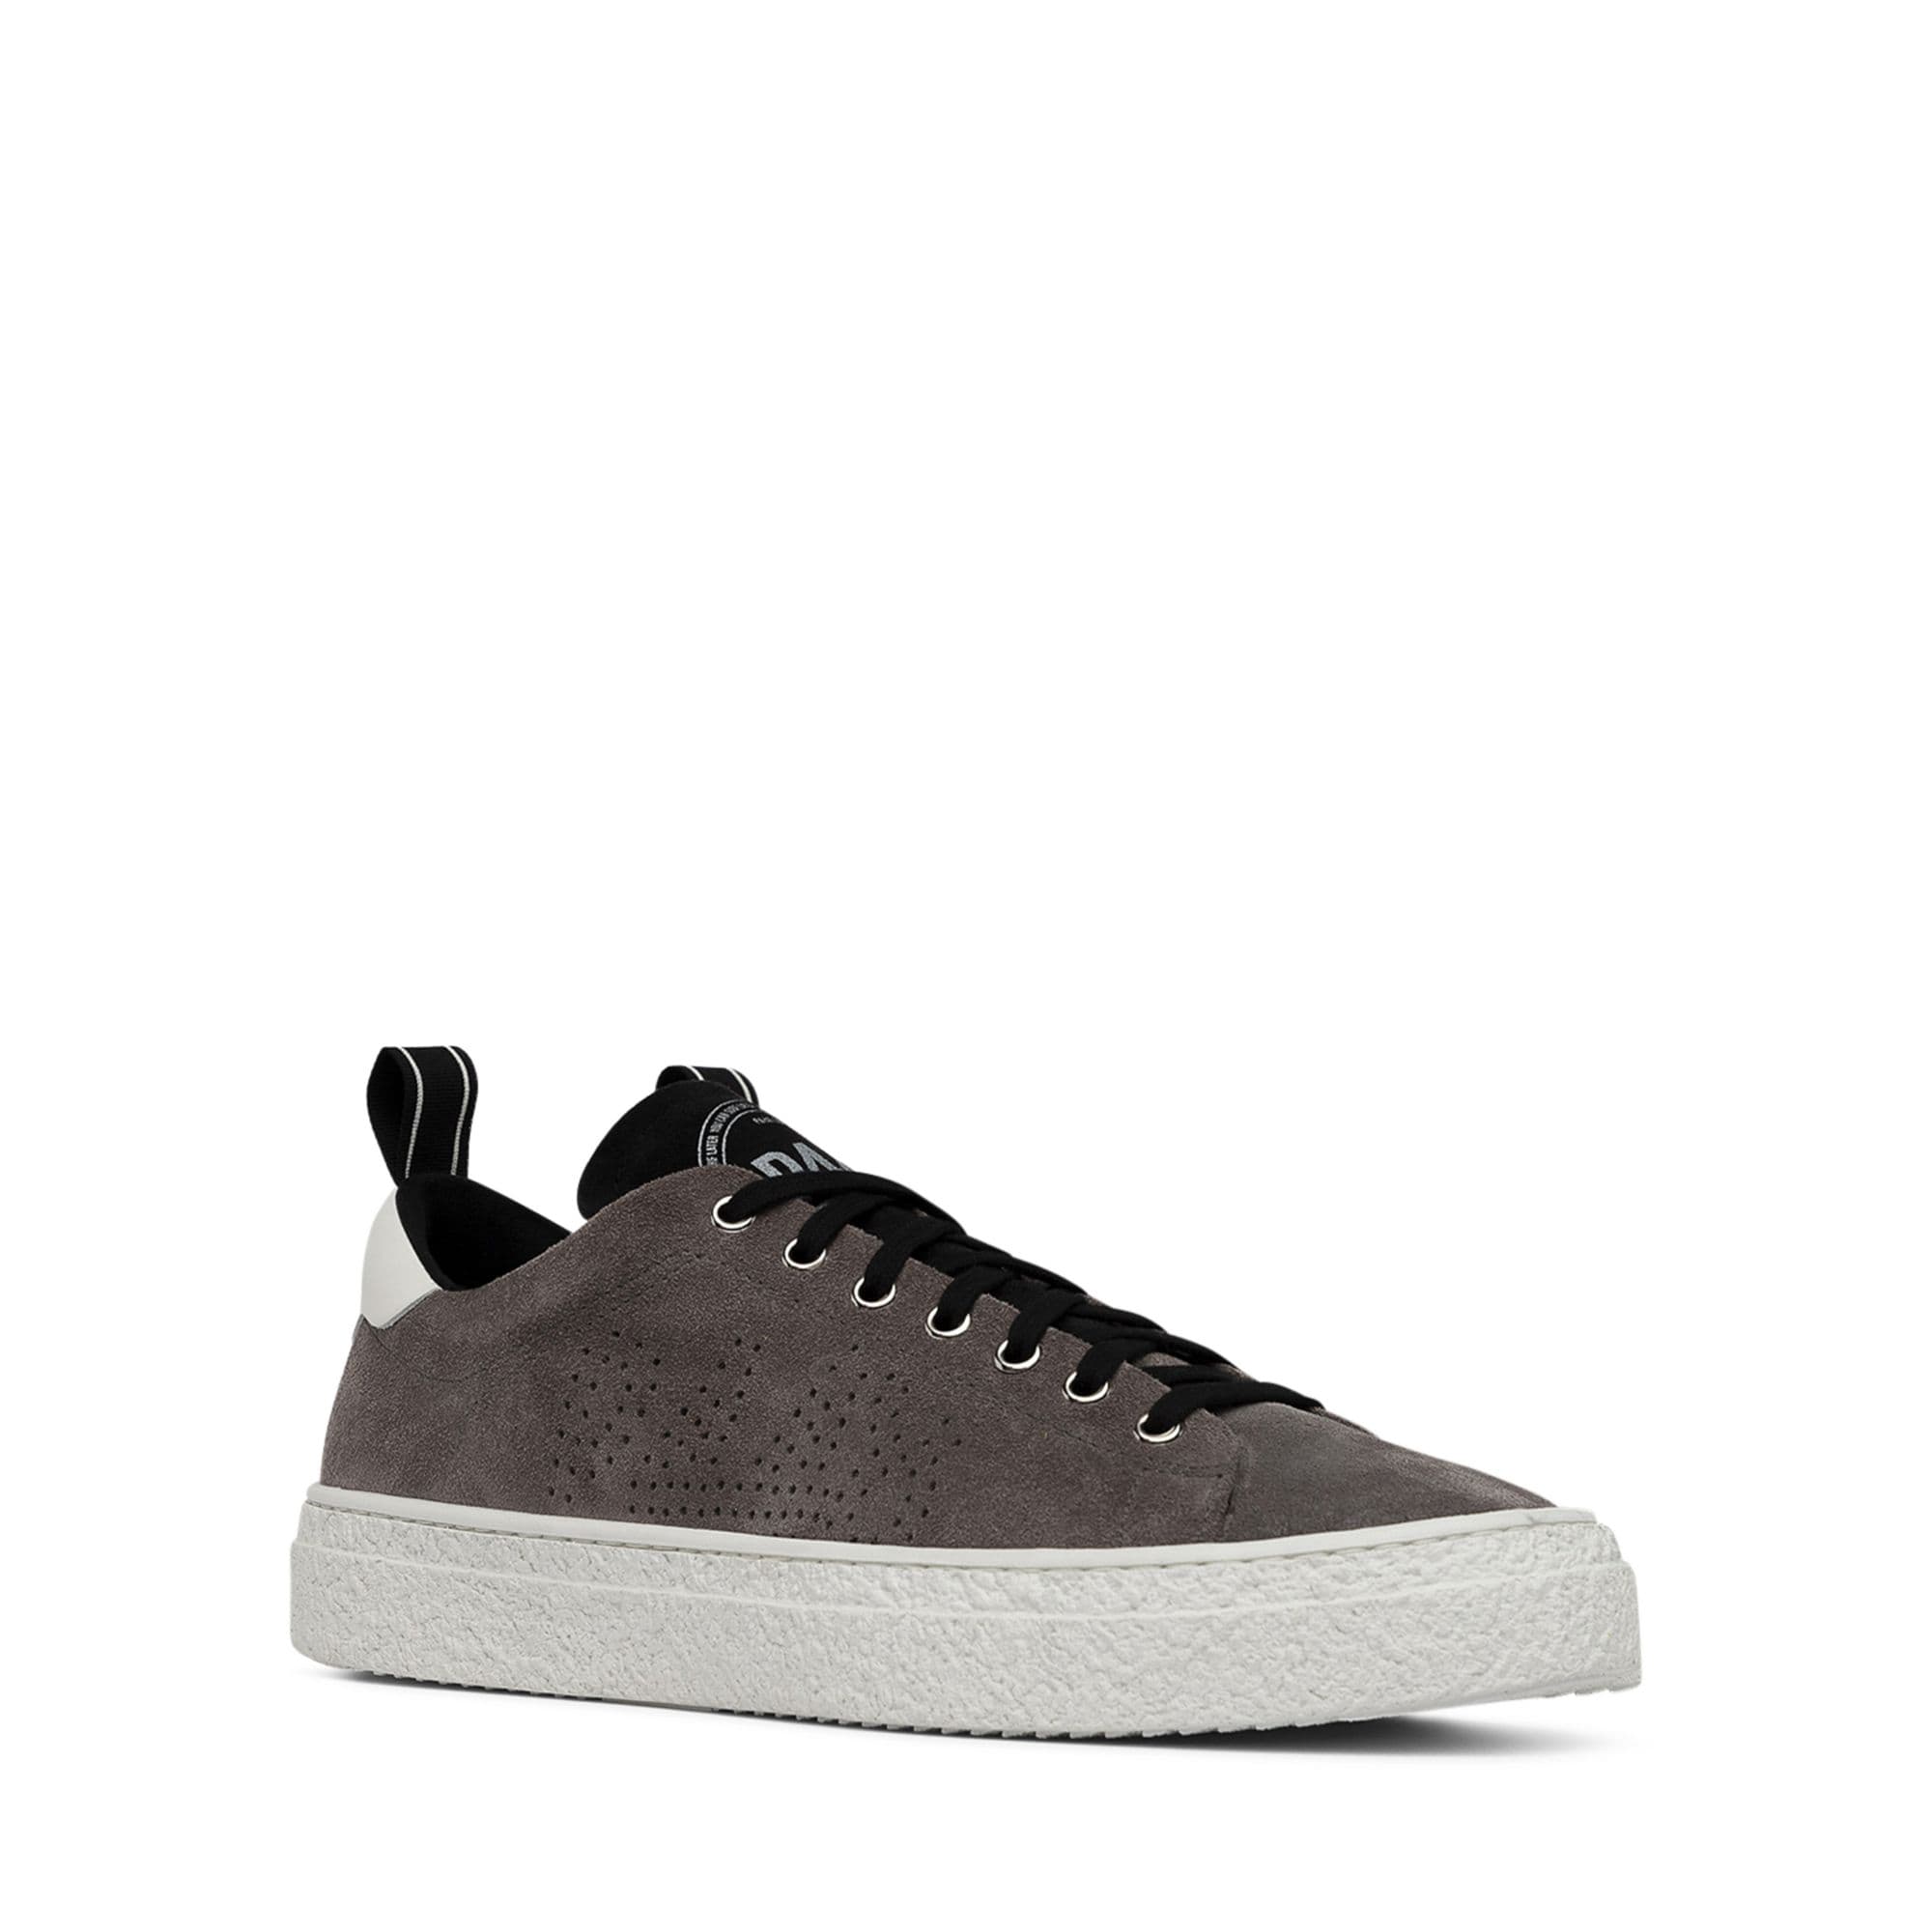 woocommerce-673321-2209615.cloudwaysapps.com-p448-mens-grey-suede-shane-lace-up-sneakers